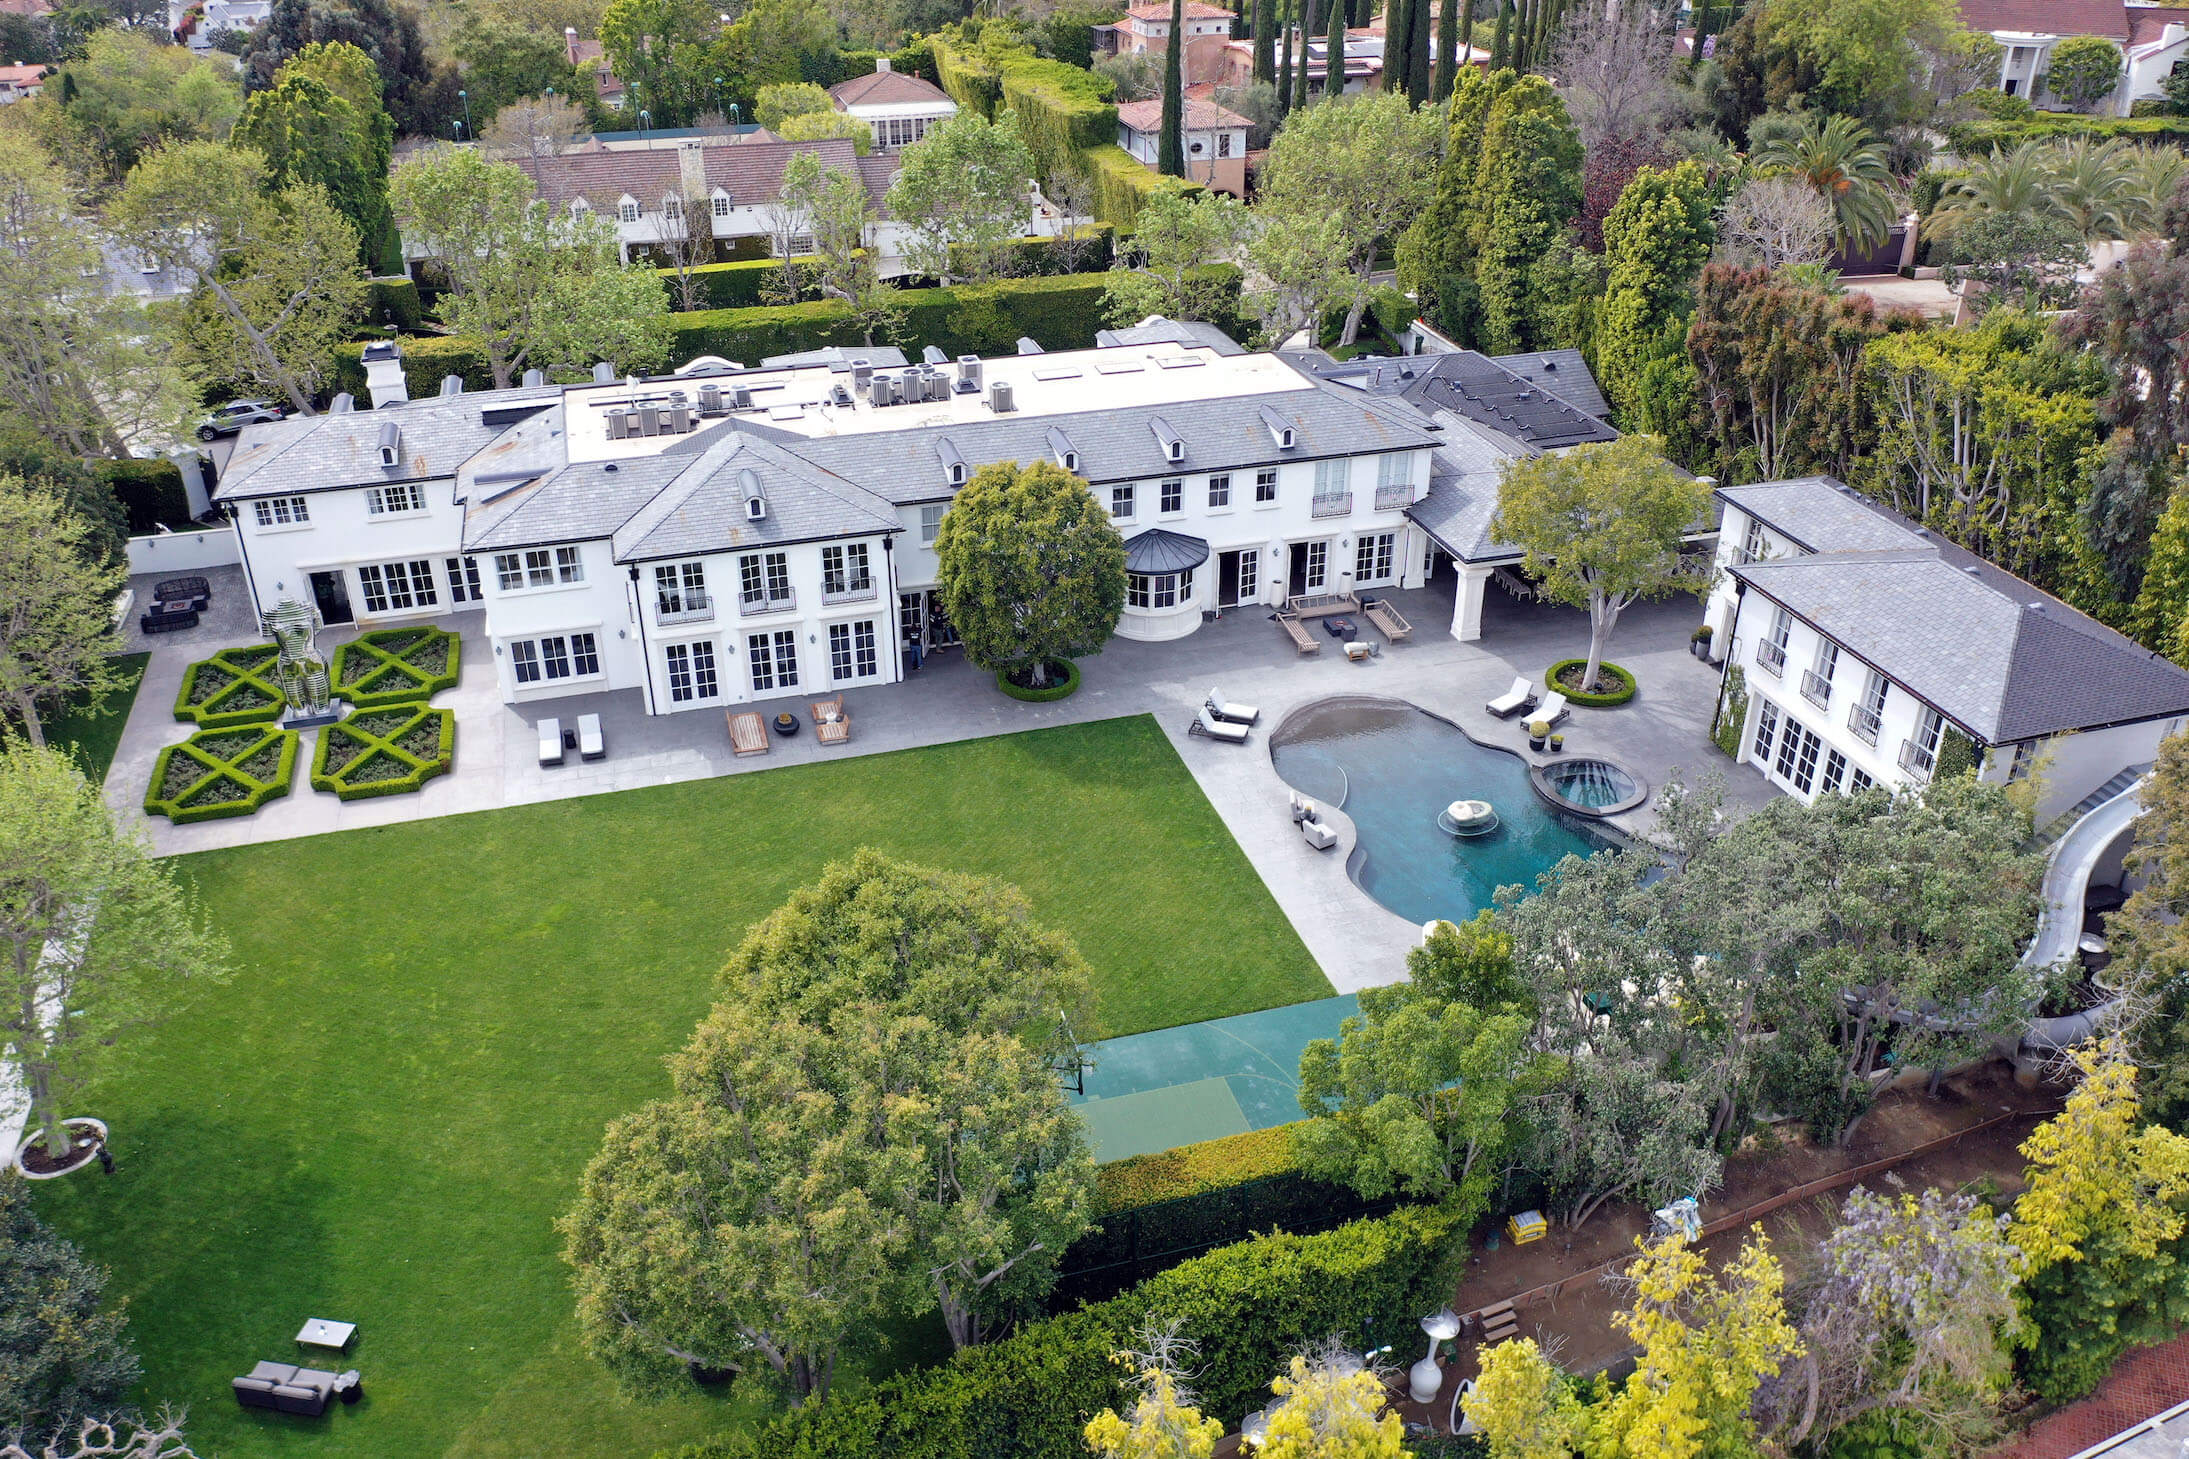 An aerial view of Sean P. Diddy Combs home in Los Angeles, including his outdoor pool